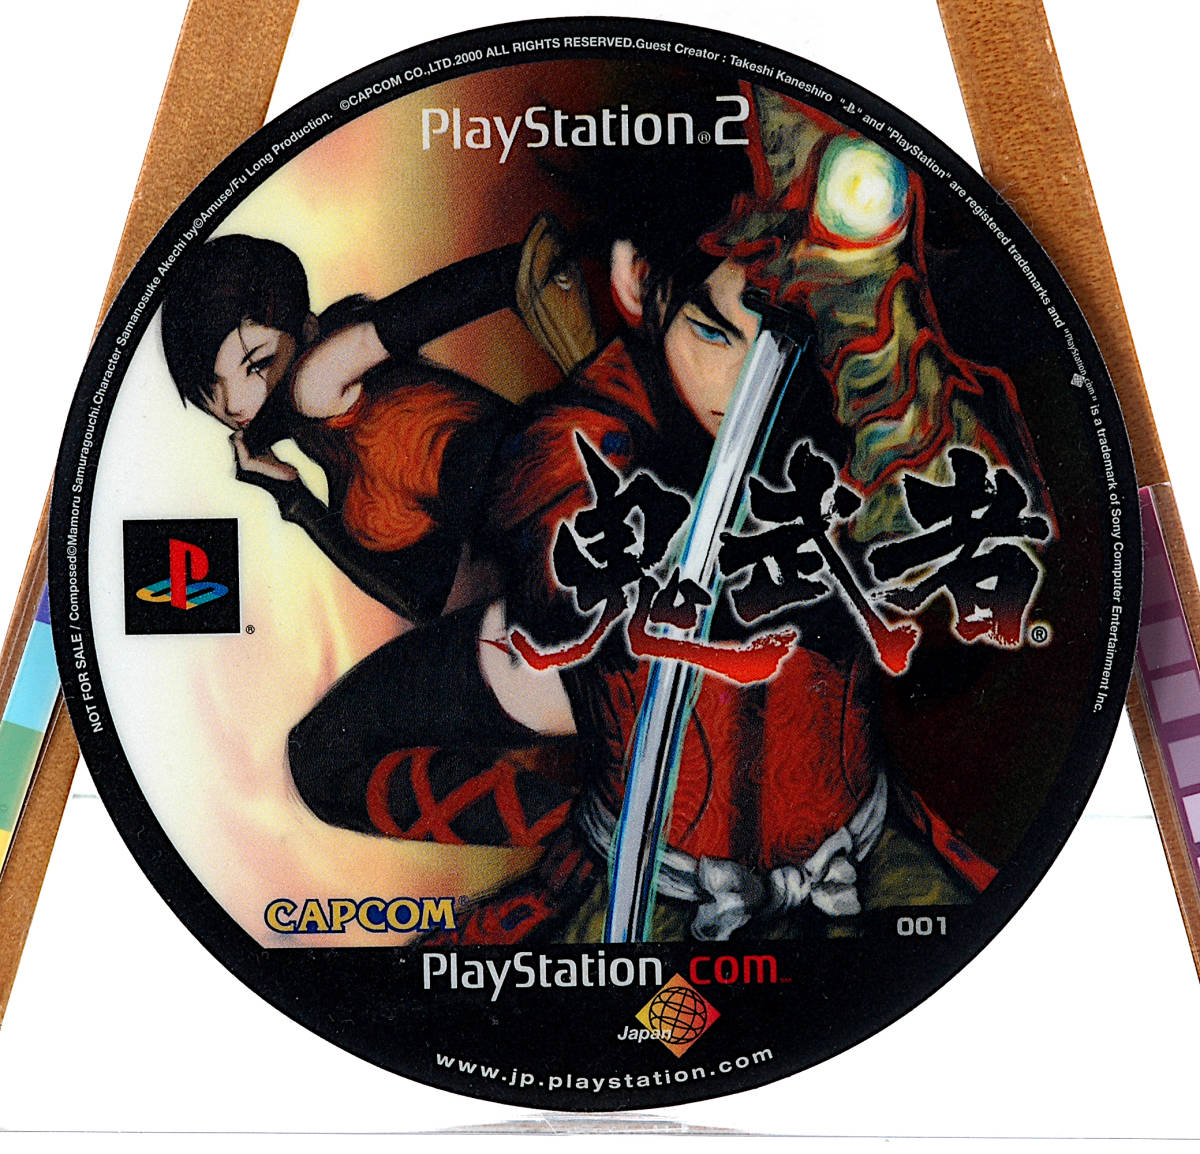 [Delivery Free]2001CAPCOM PS2 Soft Dawn of Dreams(Onimusha)Goods for Sales Promotion Pseudo DVD?鬼武者 販売店展示見本DVD?[tag4044]